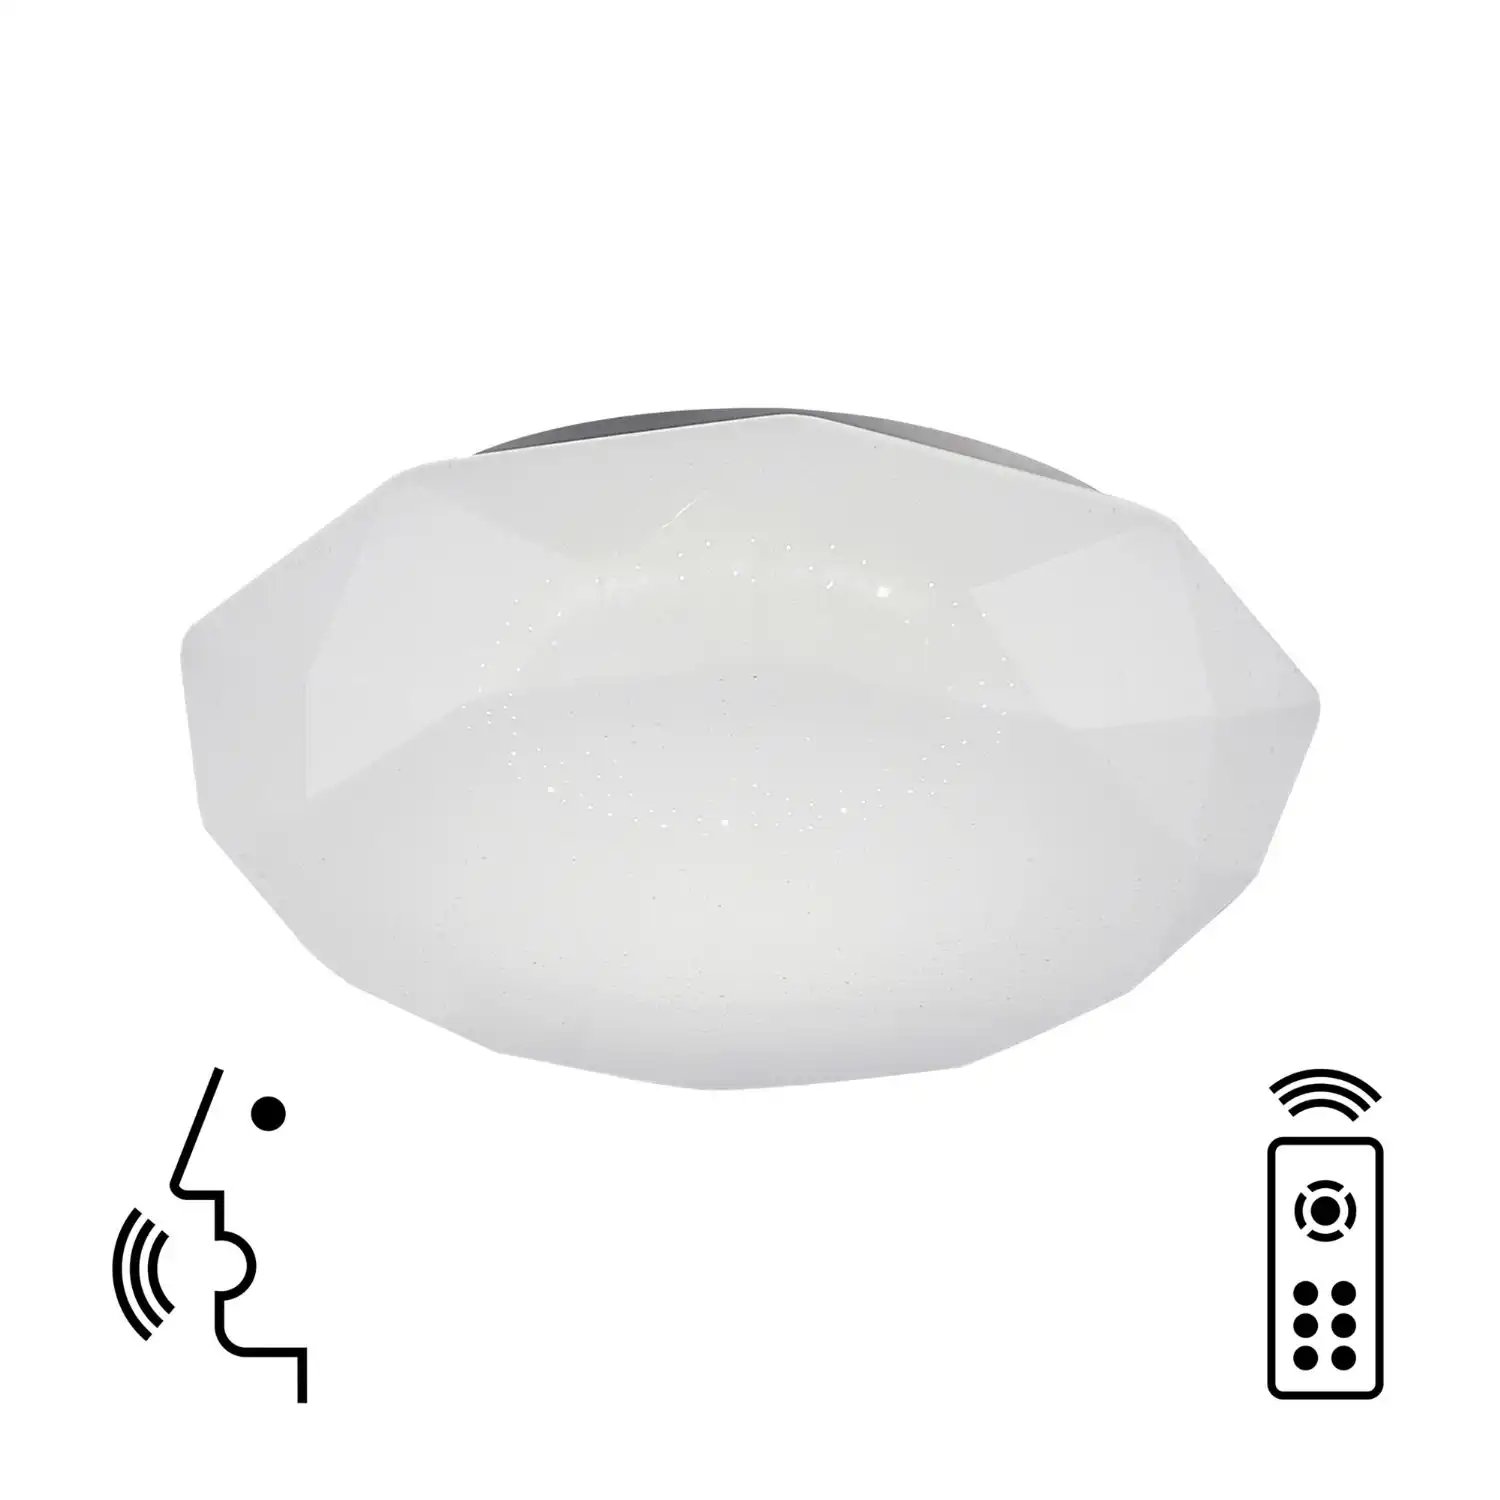 Diamante Smart Ceiling, 80W LED, 3000 5000K Tuneable White, 5200lm, Remote Control, APP, Alexa And Google Voice Control, White, 3yrs Warranty